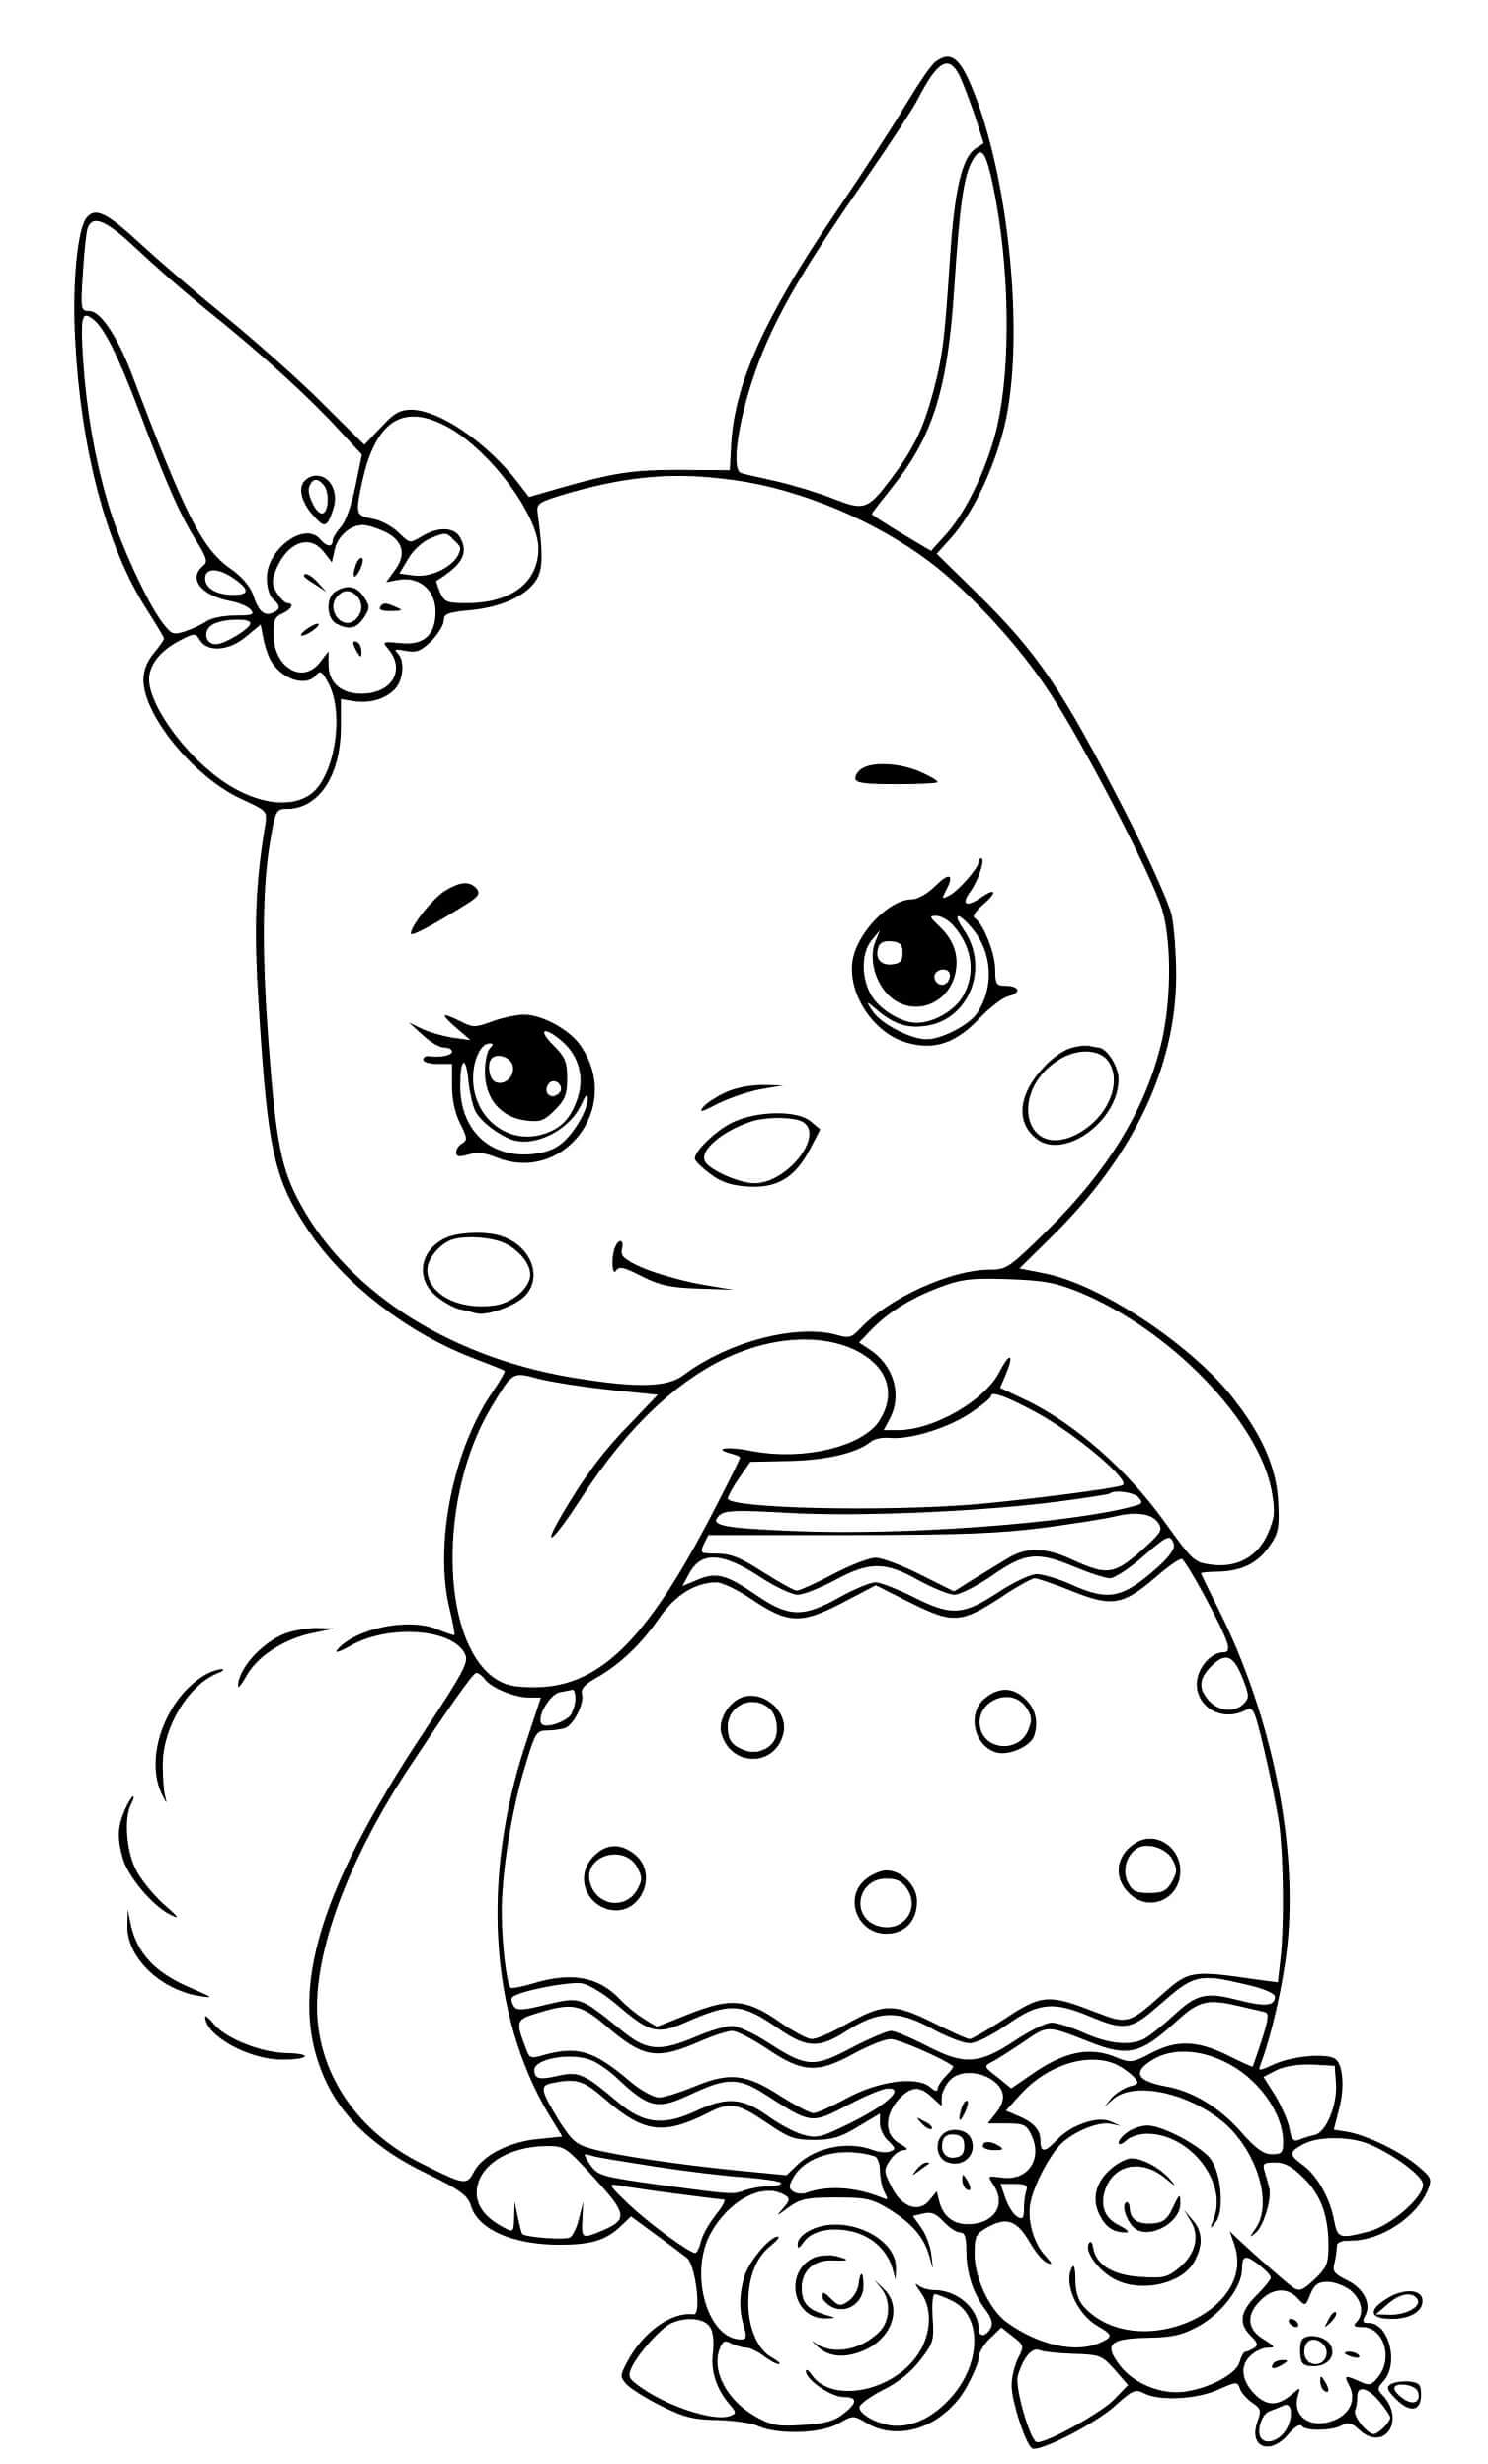 Easter Bunny With Egg Coloring Page